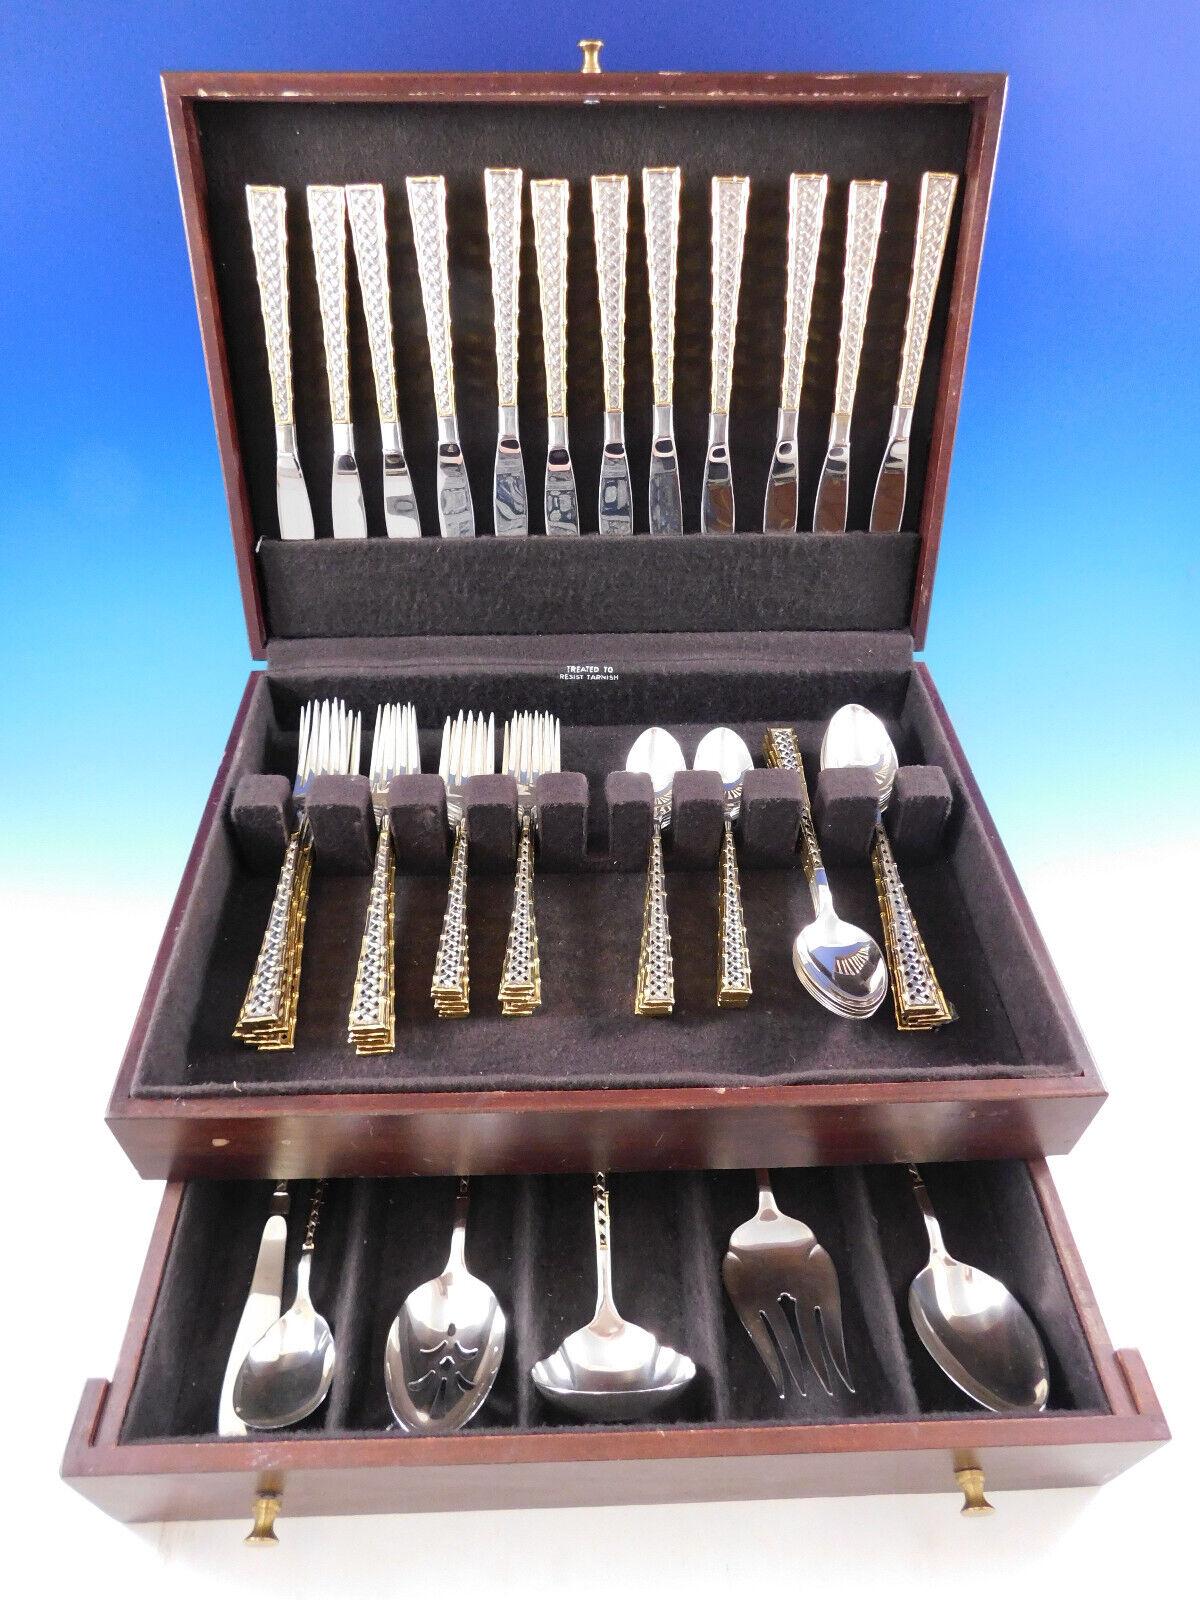 Gorgeous Golden Trade winds by International sterling silver flatware set - 66 pieces. This pattern features a basket weave design and bamboo border with gold accent. This set includes:
12 Knives, 8 3/4